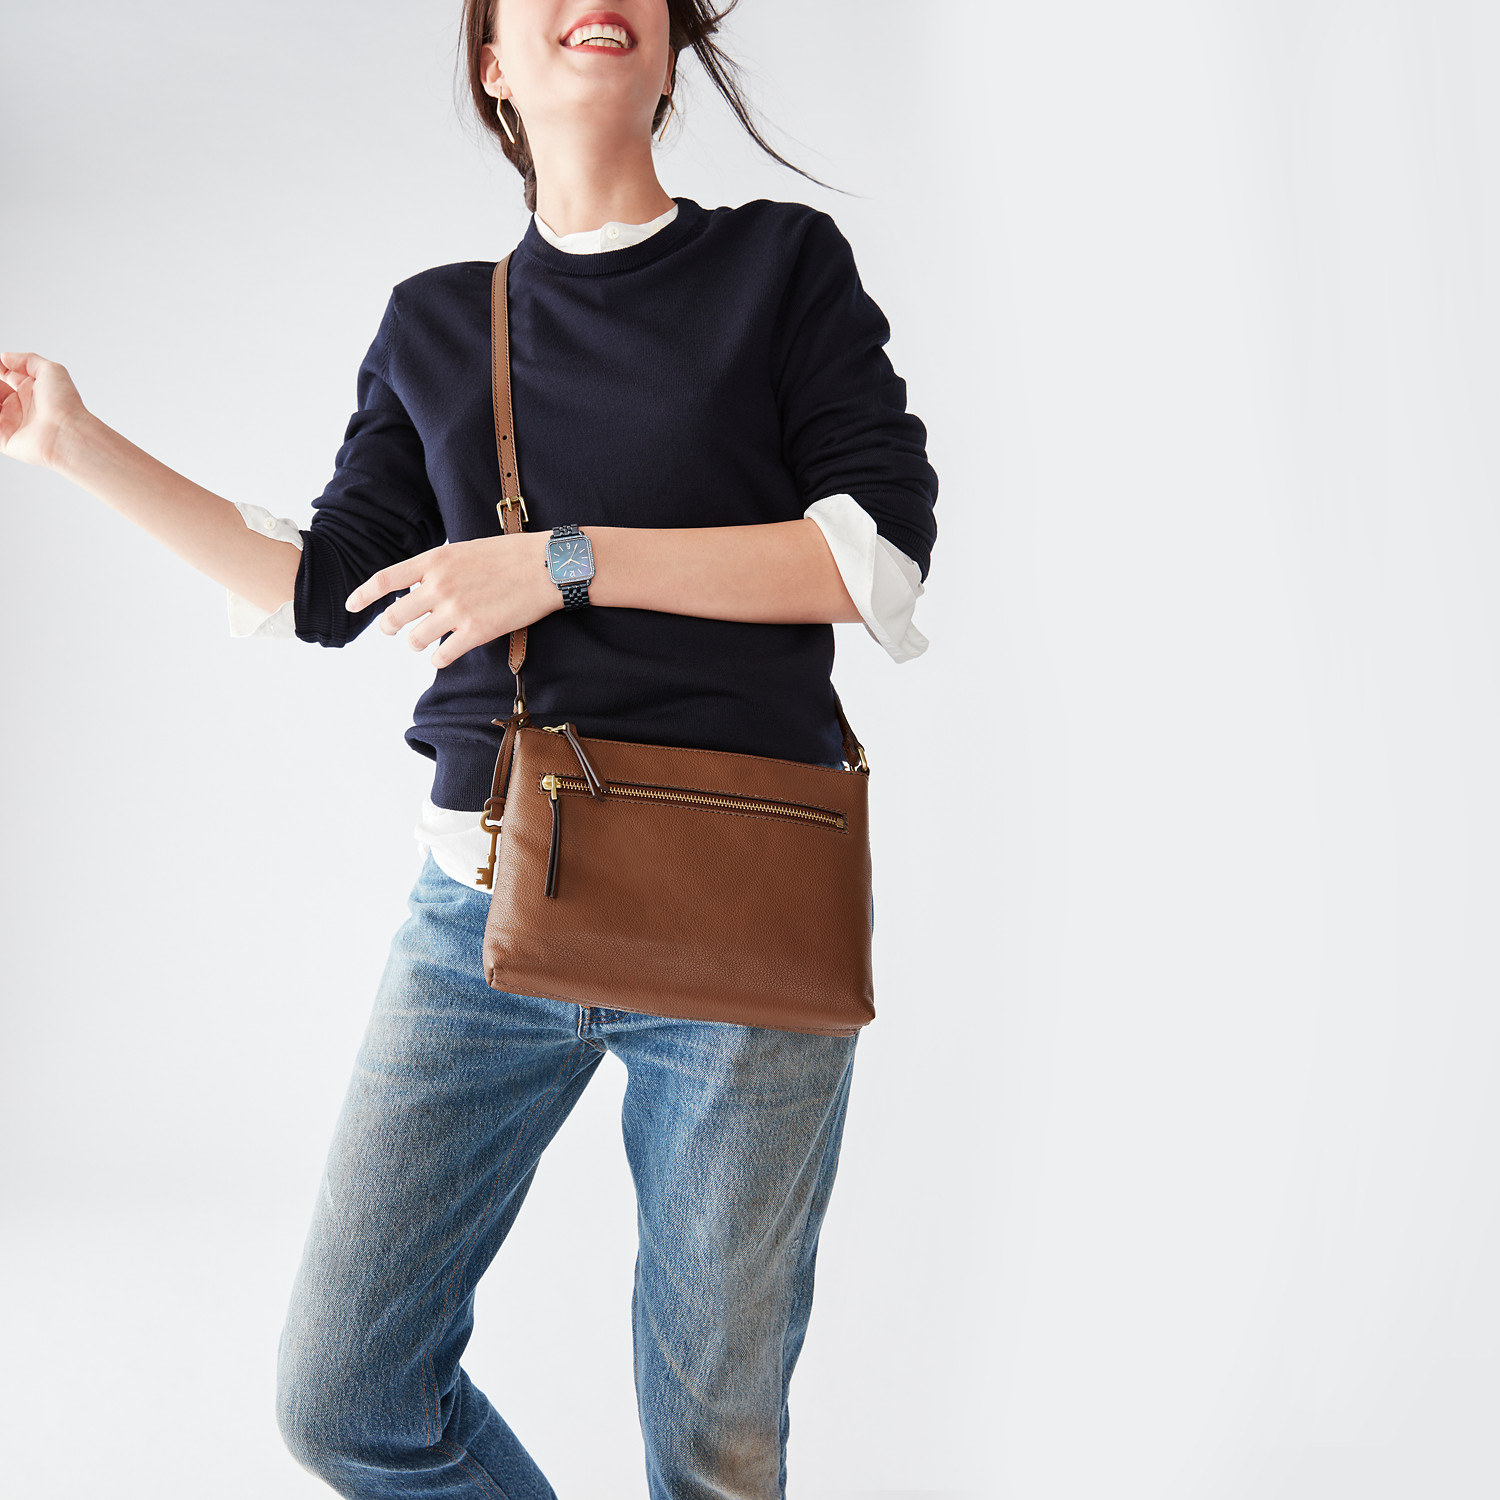 Model with the crossbody rectangle-shaped small bag across their shoulder with a zipper across the top and upper front